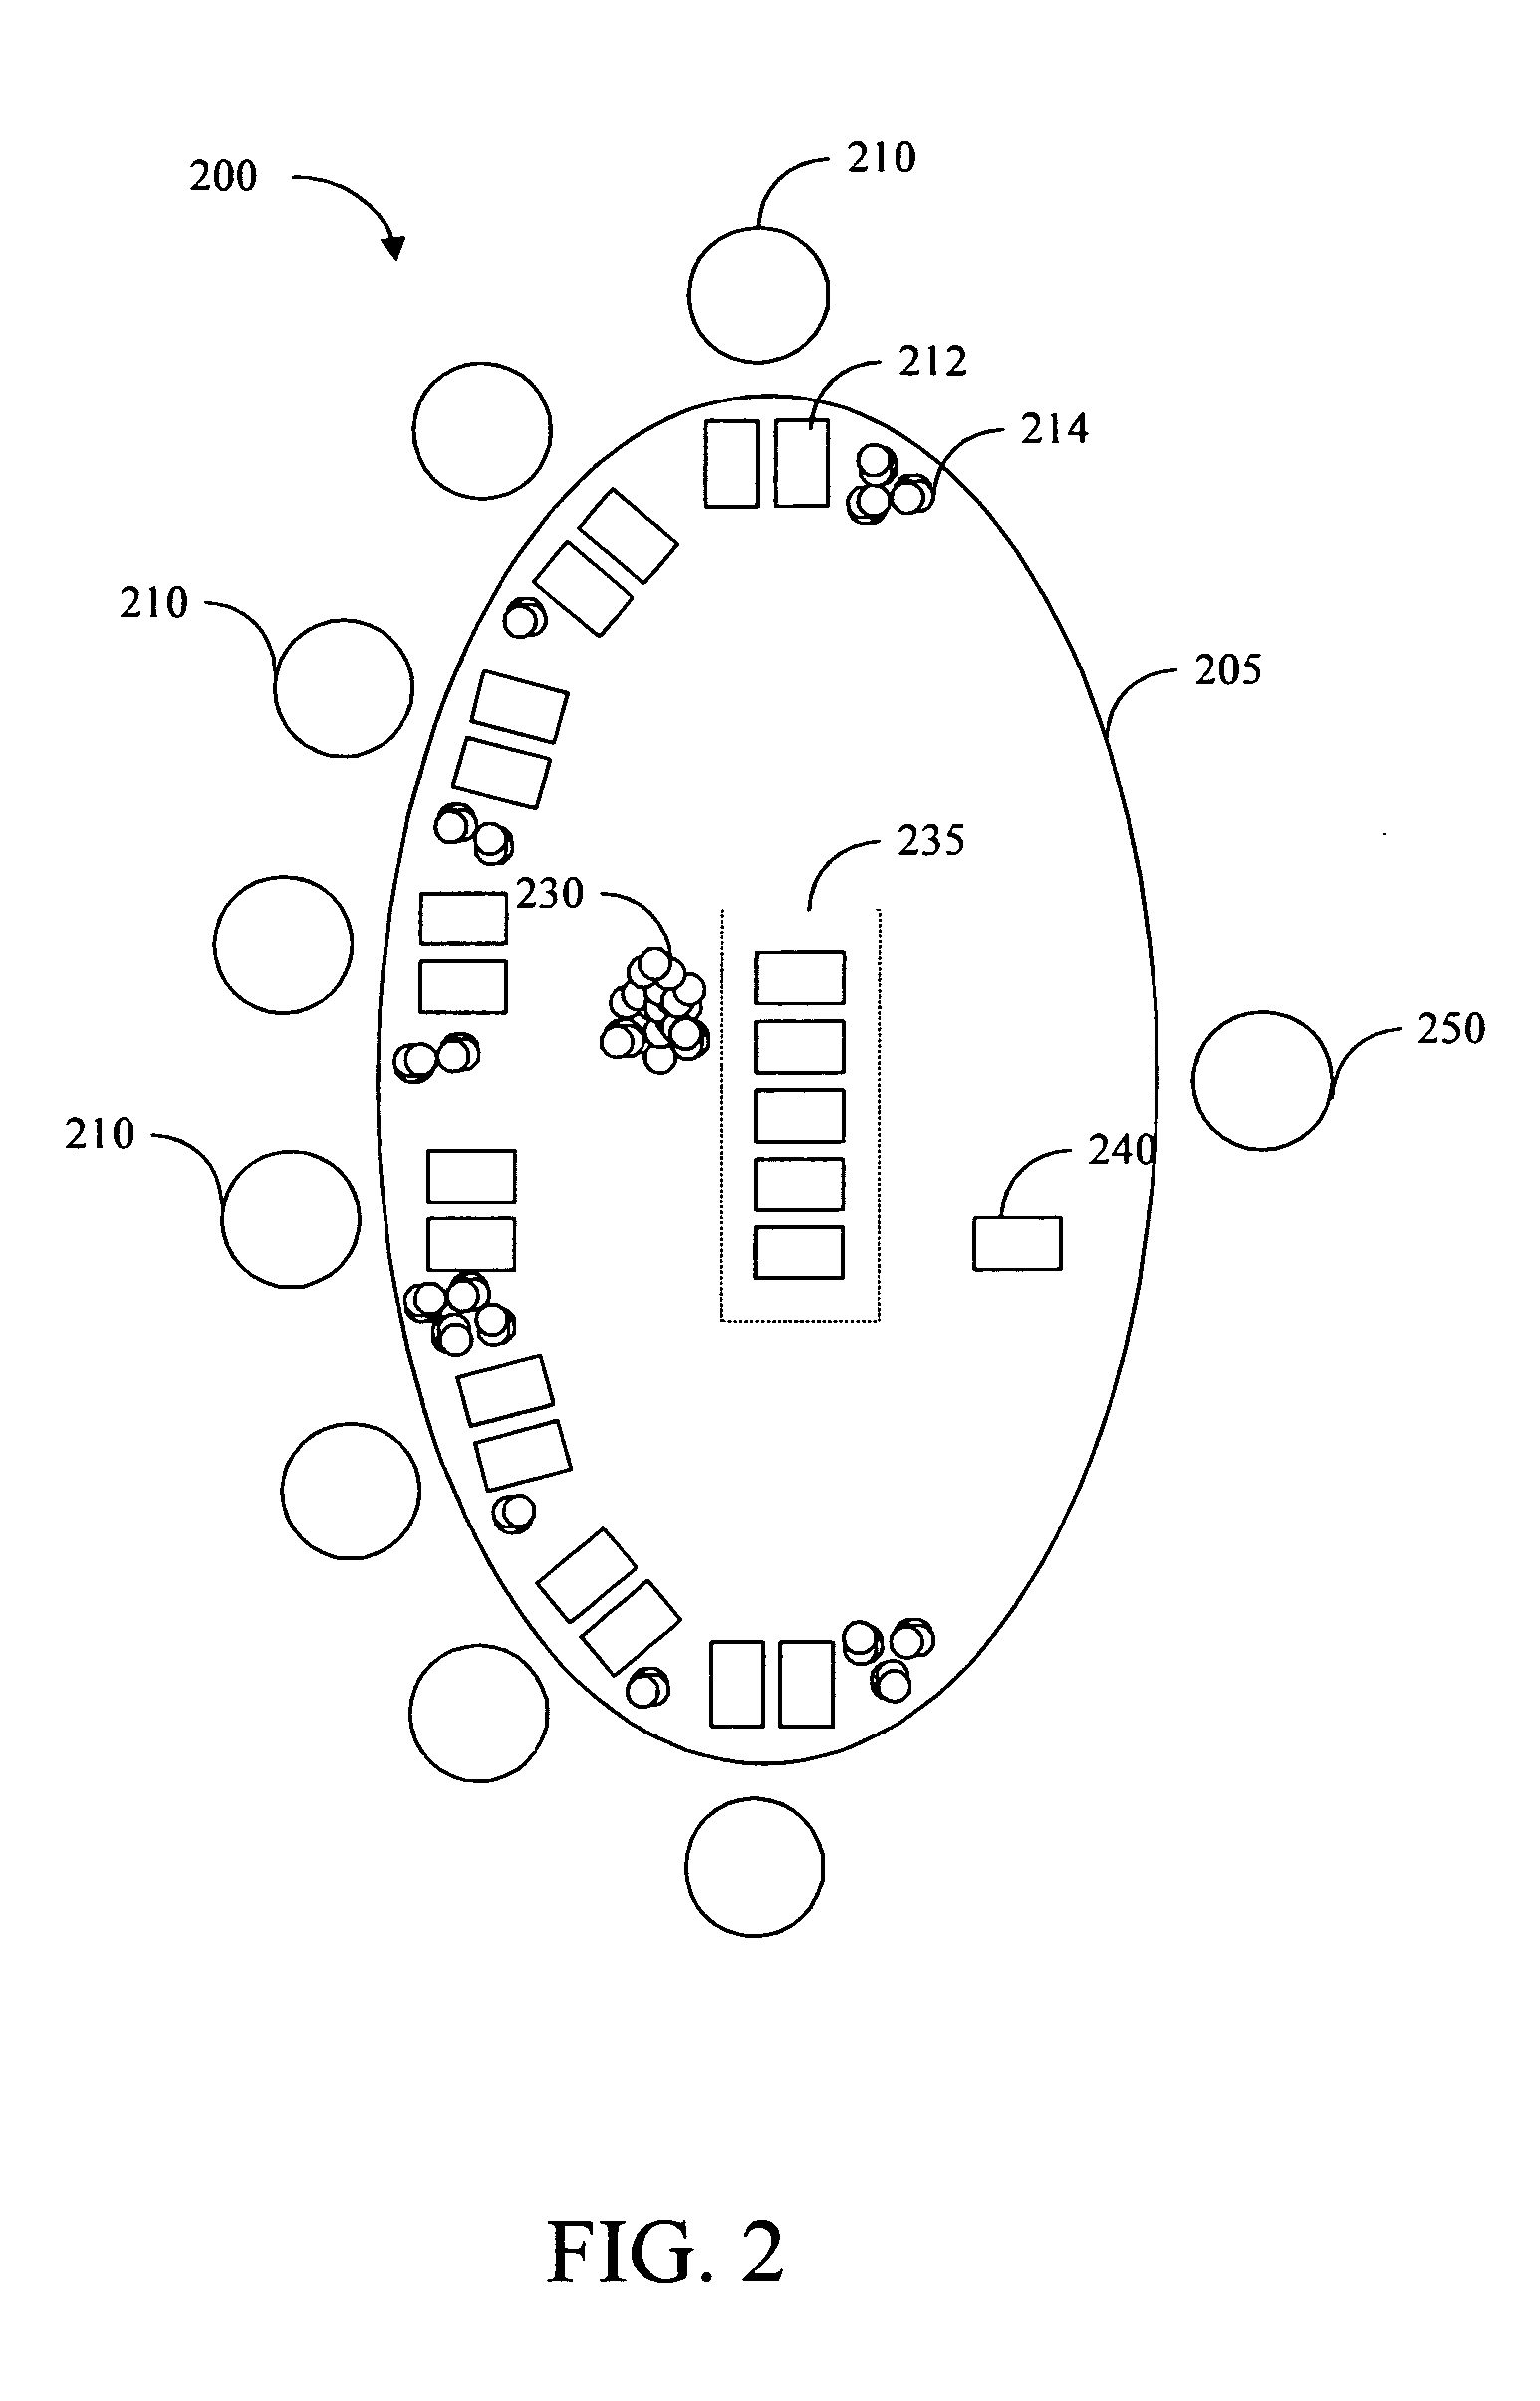 Apparatus and method for playing cards with a unique betting format